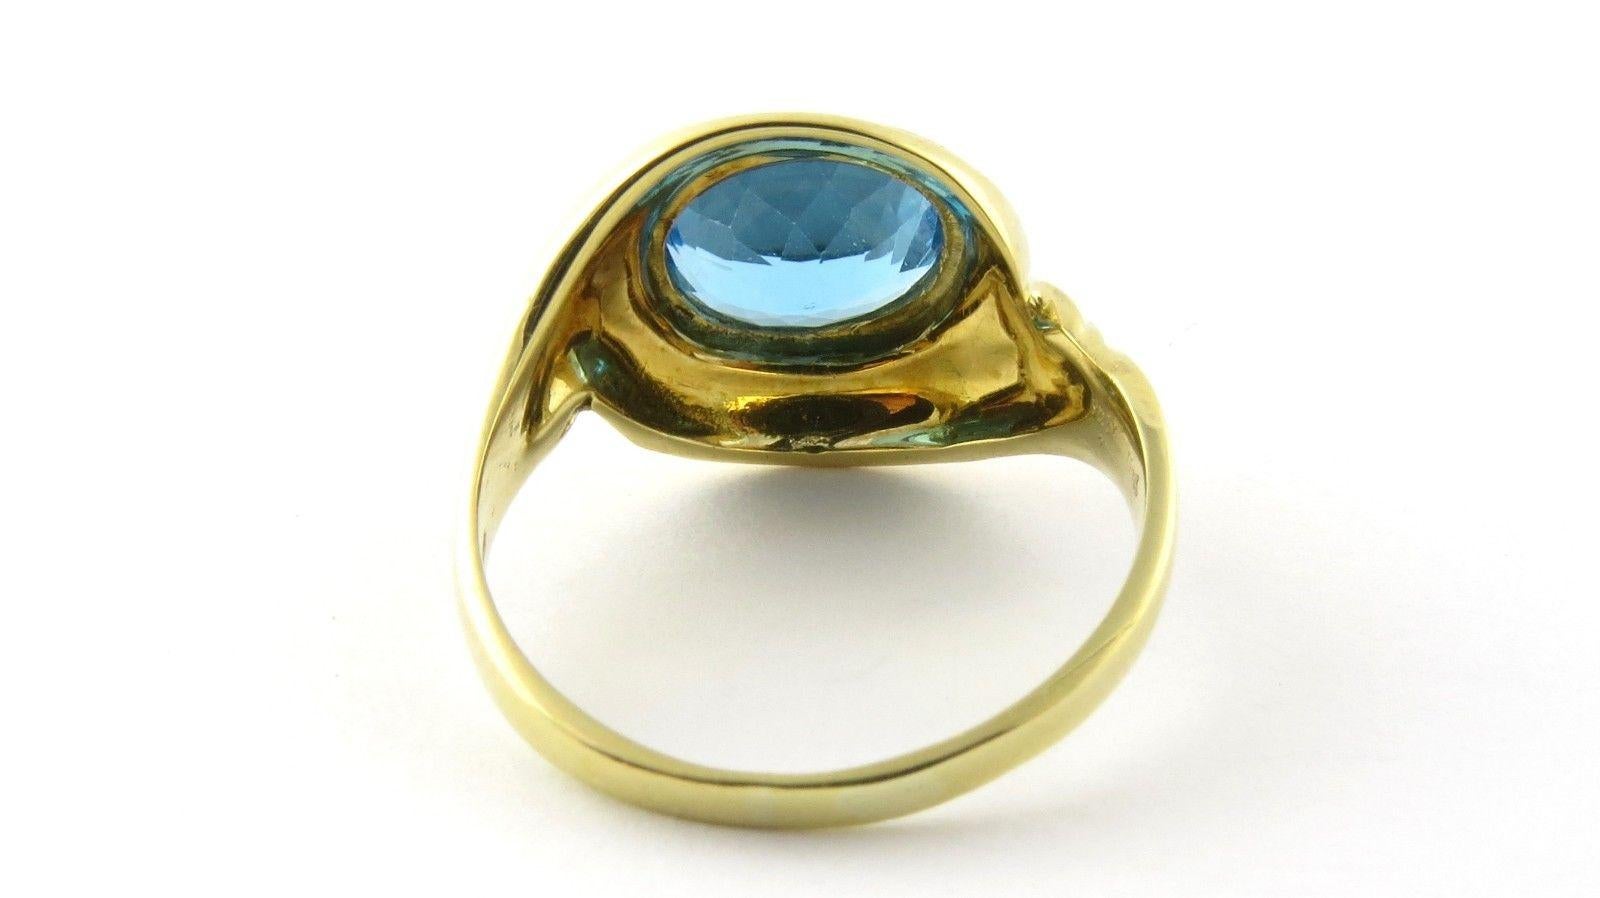 Sabbadini Gioielli 18K Yellow Gold Oval Blue Topaz Ring
This authentic Sabbadini ring is set with a stunning oval blue topaz stone.

Blue Topaz is approx. 9mm x 6.5 mm

Front of ring is approx. 18mm x 14mm

Shank of ring is 2mm wide

5.4 g / 3.4